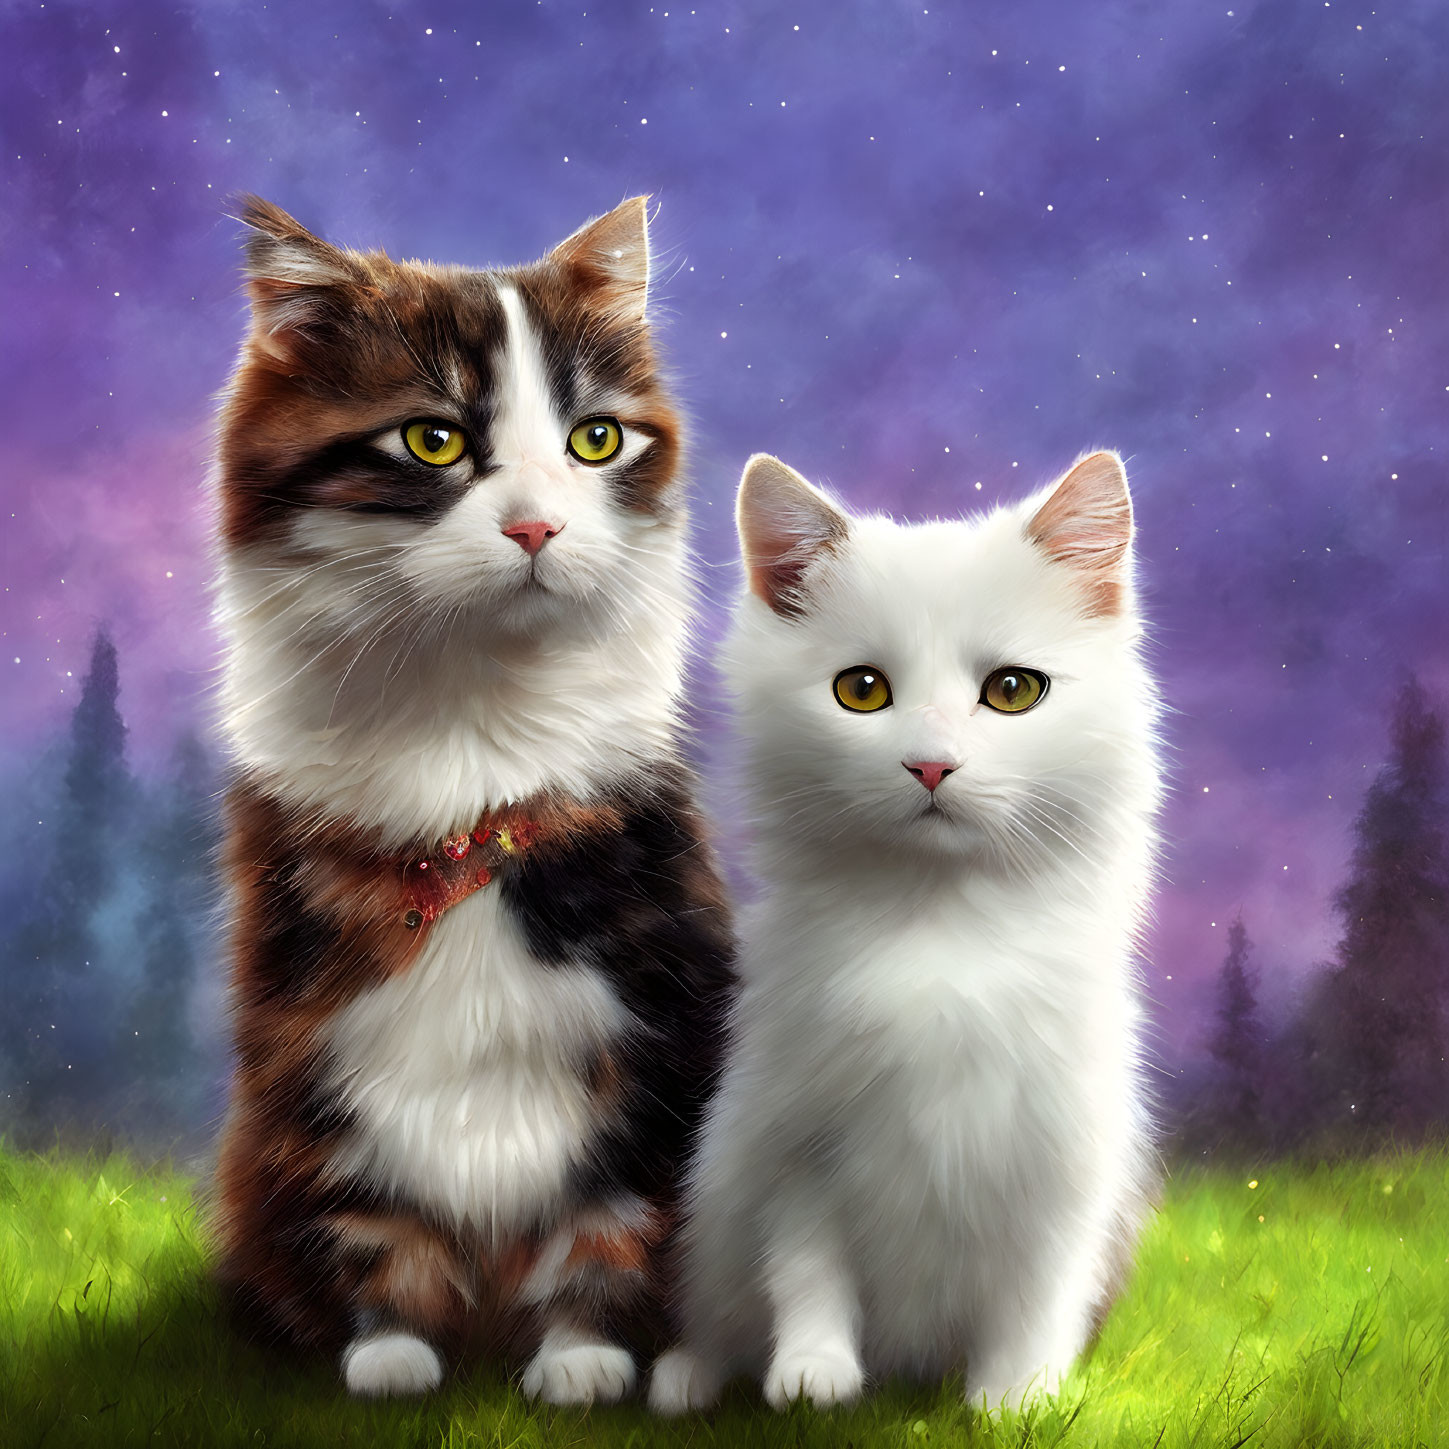 Fluffy calico and white cats under mystical purple starry sky and forest silhouette